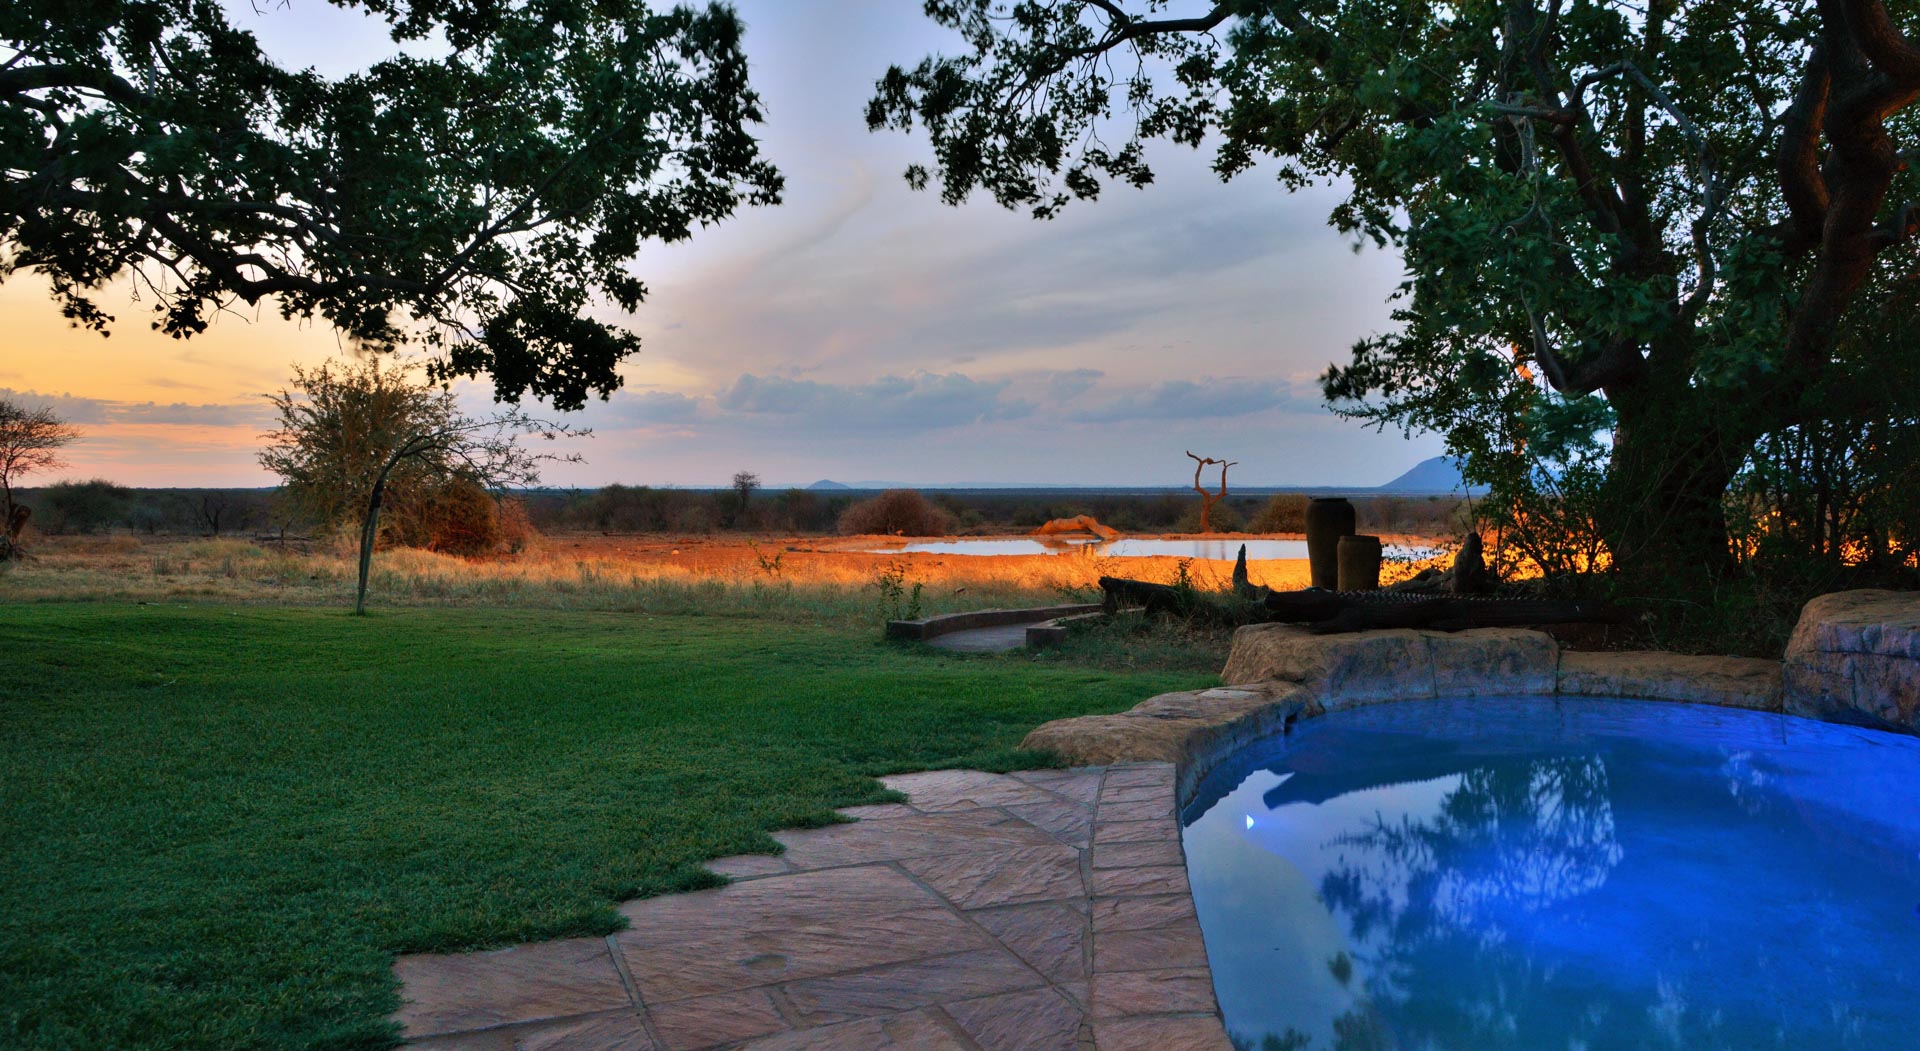 the pool and the waterhole at sunset